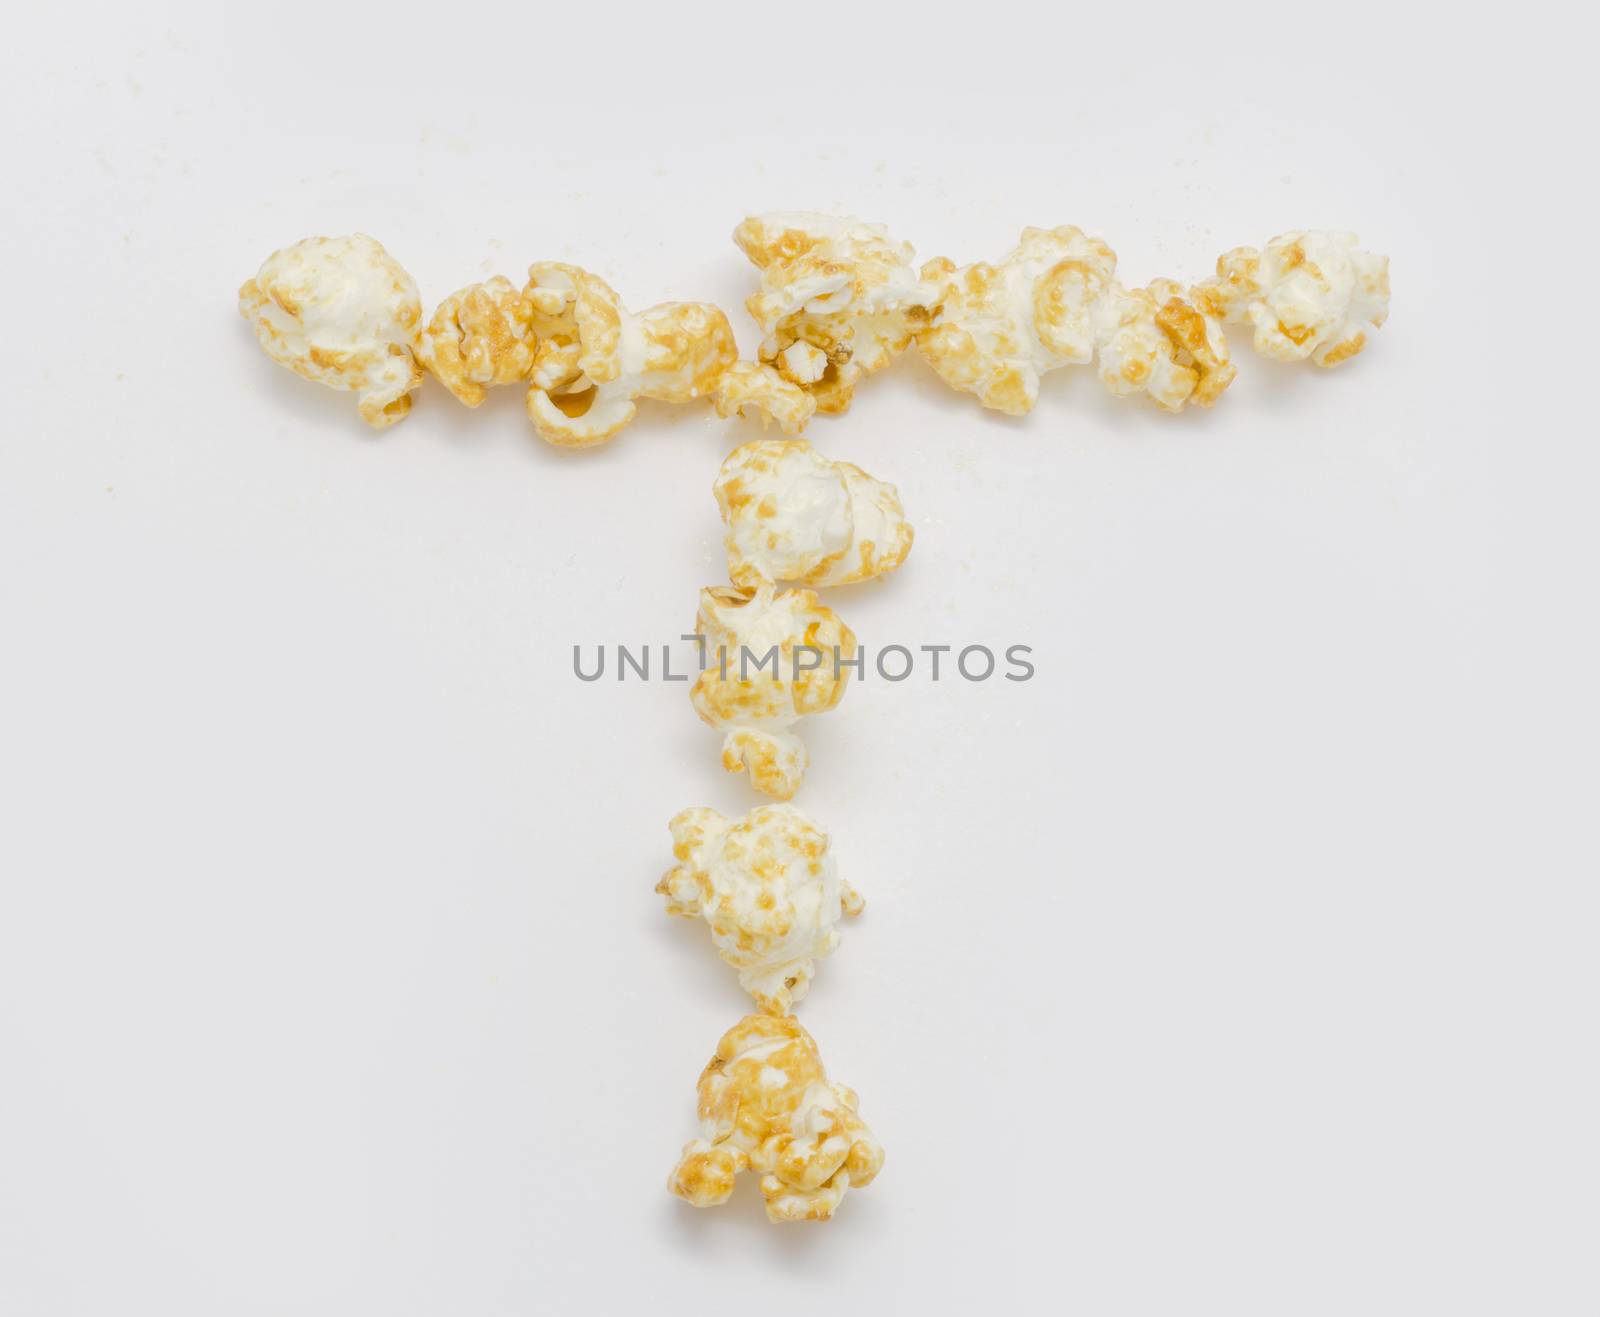 pop corn forming letter T isolated on white background